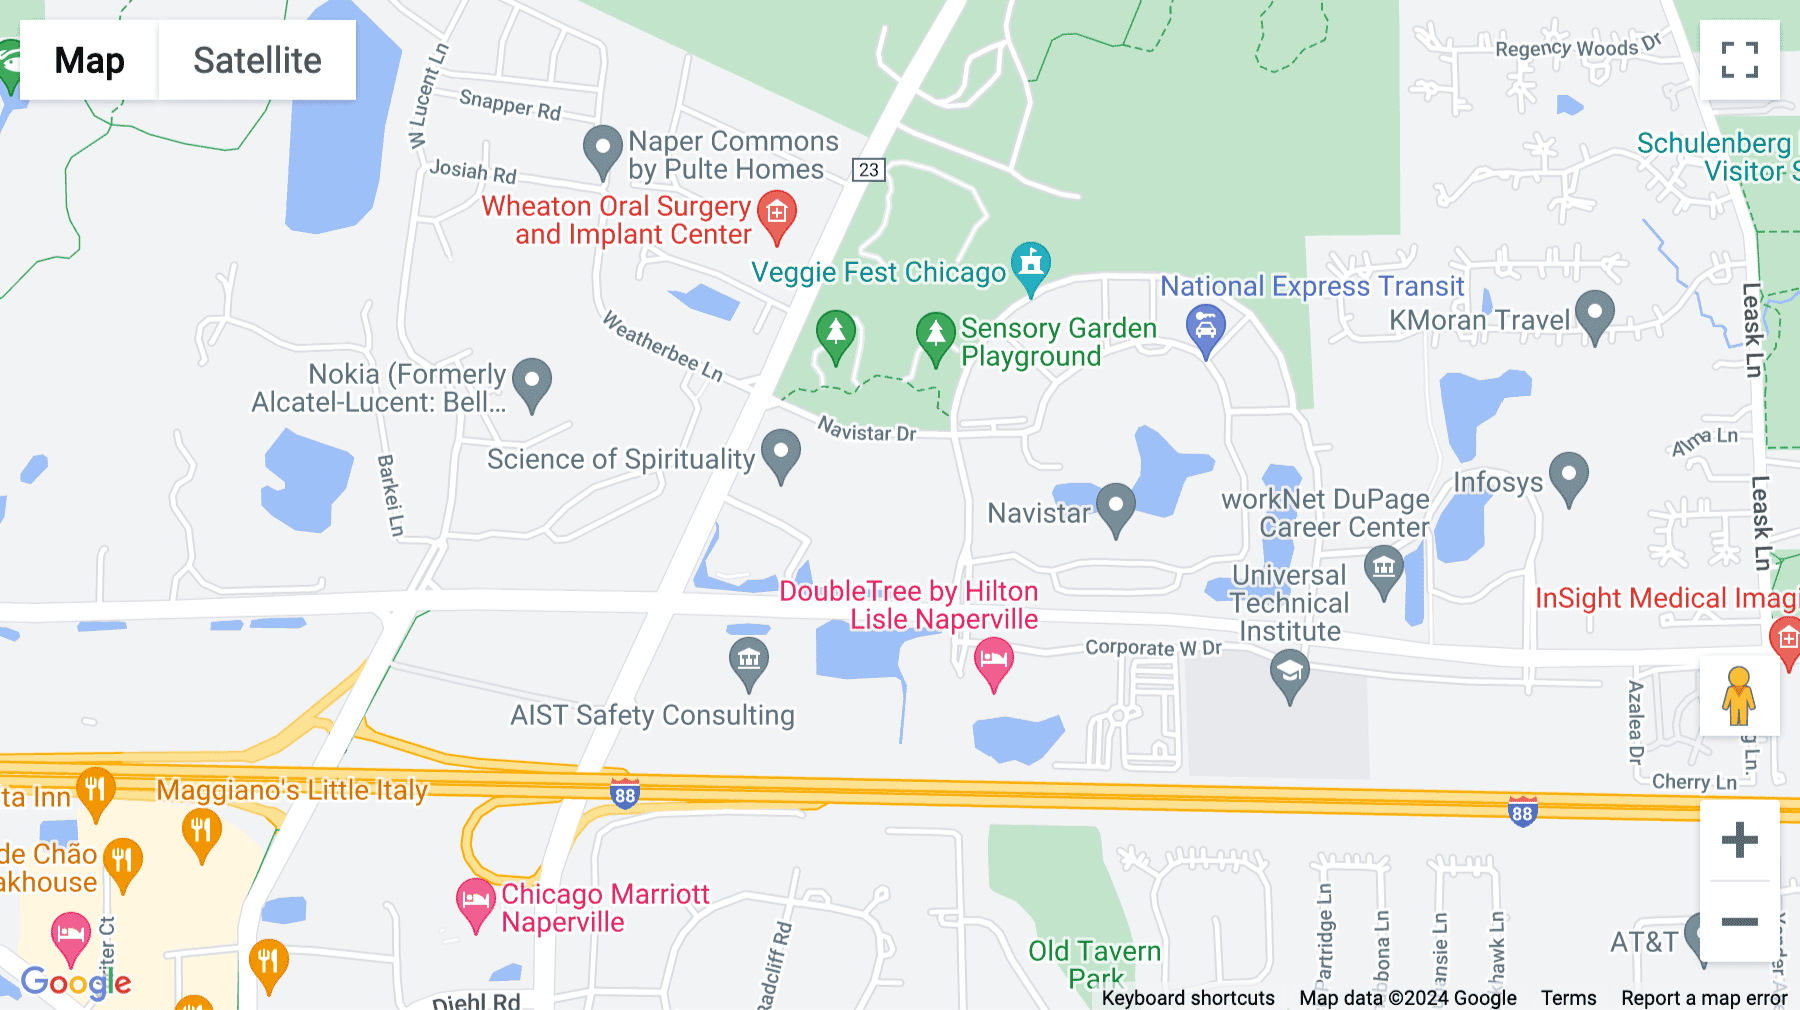 Click for interative map of 3030 Warrenville Road, Lisle